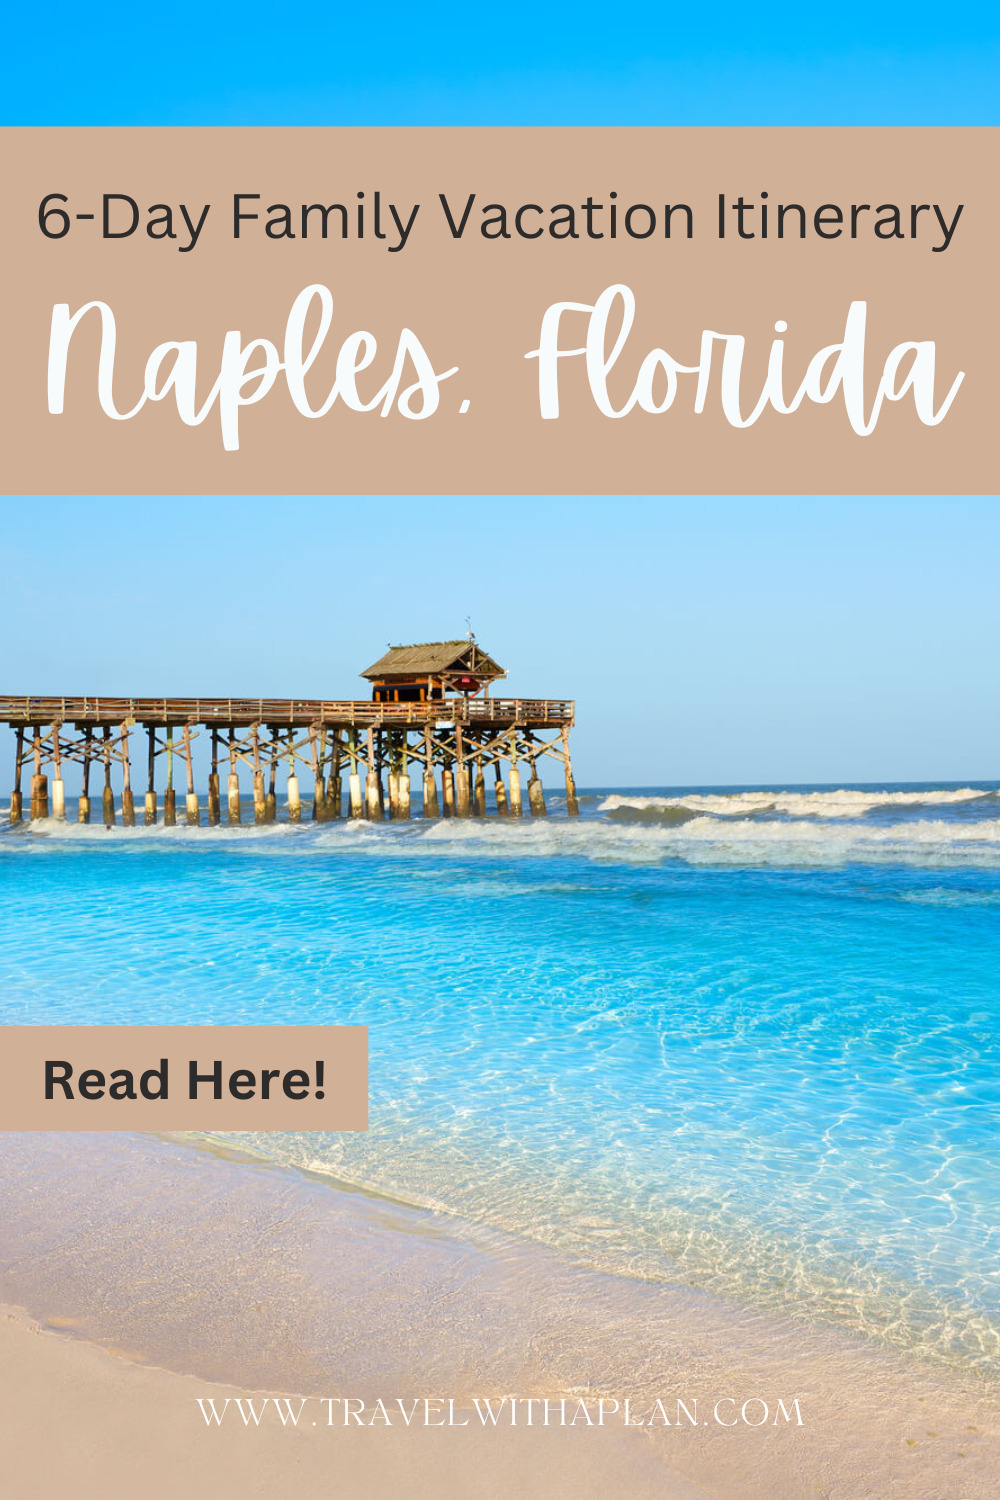 Planning a family vacation to Naples, Florida?  Save yourself hours of planning by checking out our family-friendlay Naples FL itinerary to plan the best Florida vacation yet!  #naplesFL #floridavacation